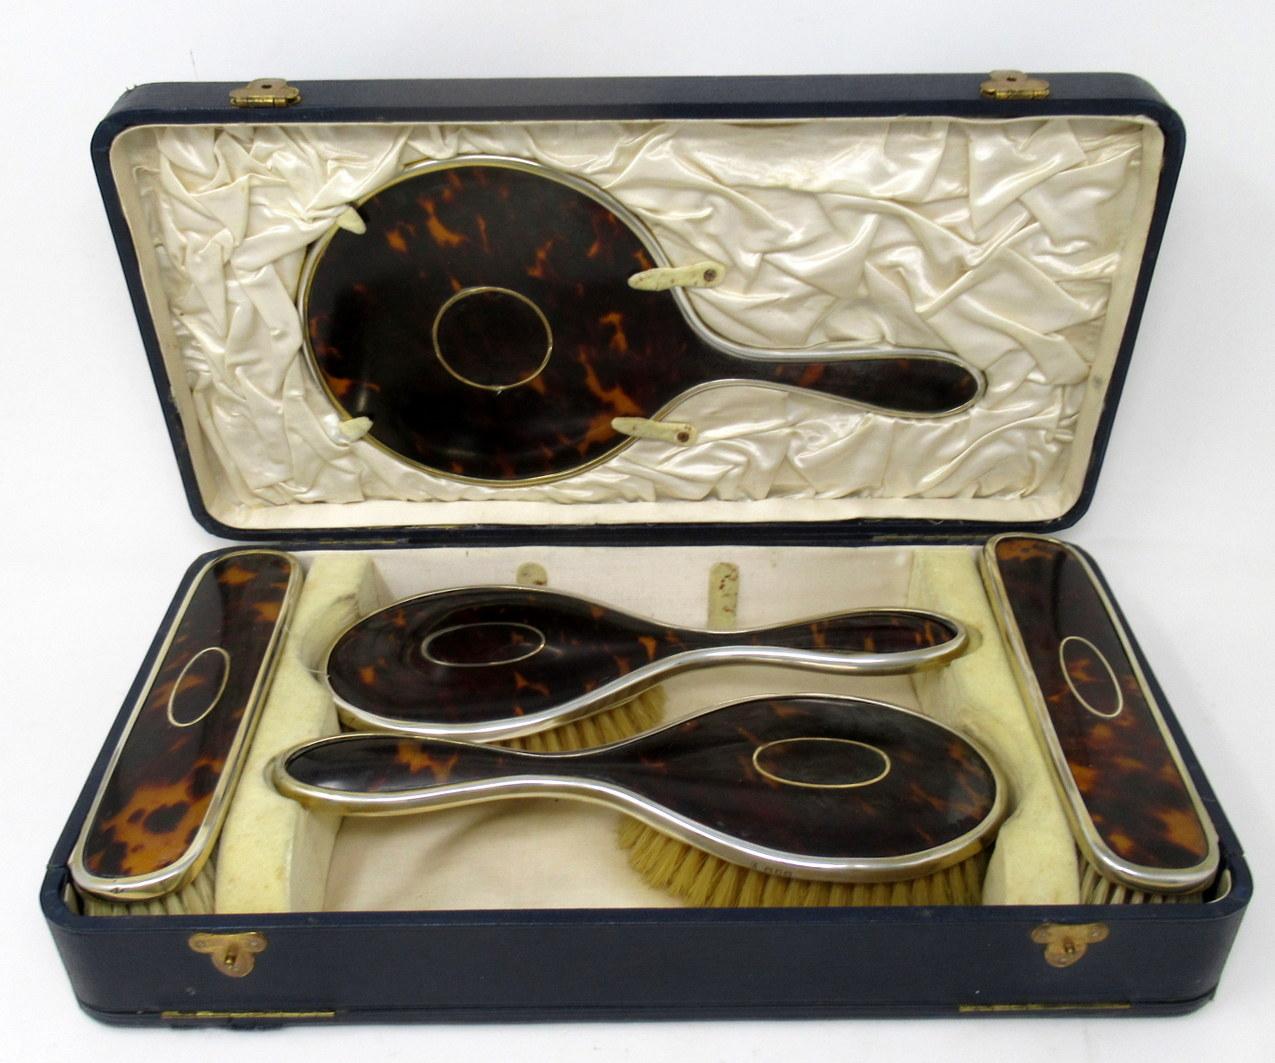 Stunning Edwardian Grand Tour style English sterling silver ladies' cased vanity dressing table grooming set of outstanding quality, with attractive shell inlay detail to all lids.  

Collection included a hand mirror, pair clothes brushes and pair